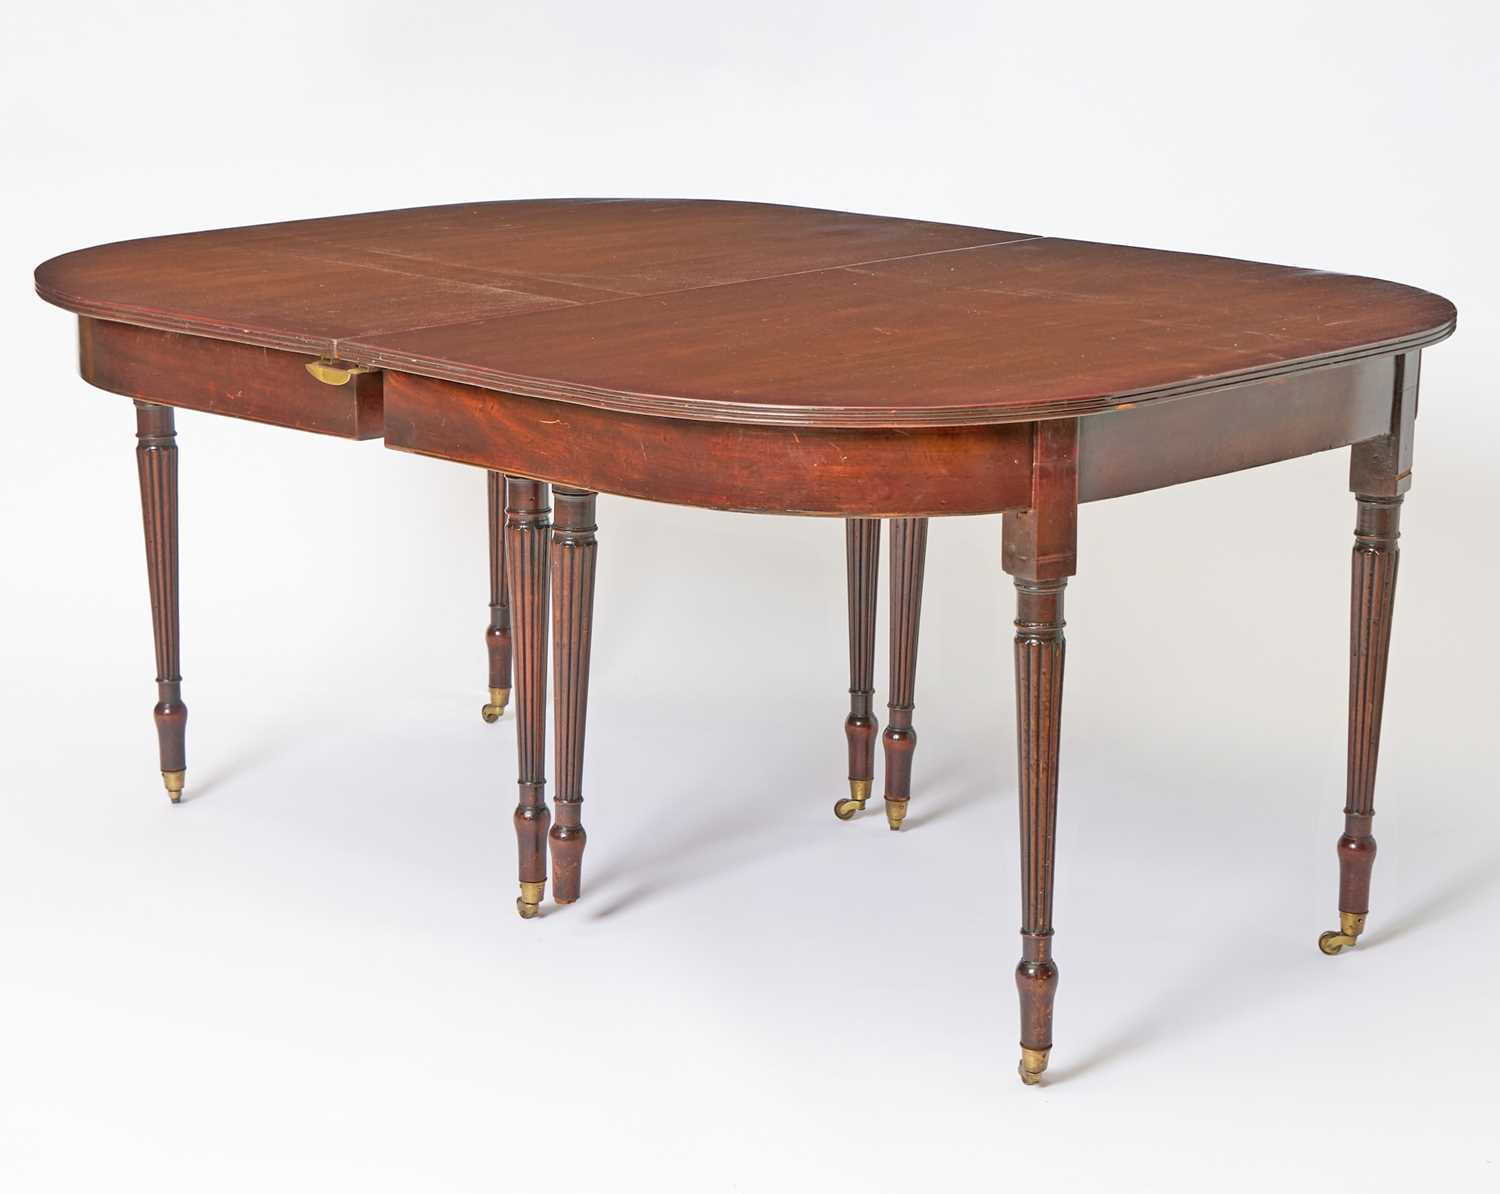 Lot 196 - George IV Carved Walnut Extension Dining Table